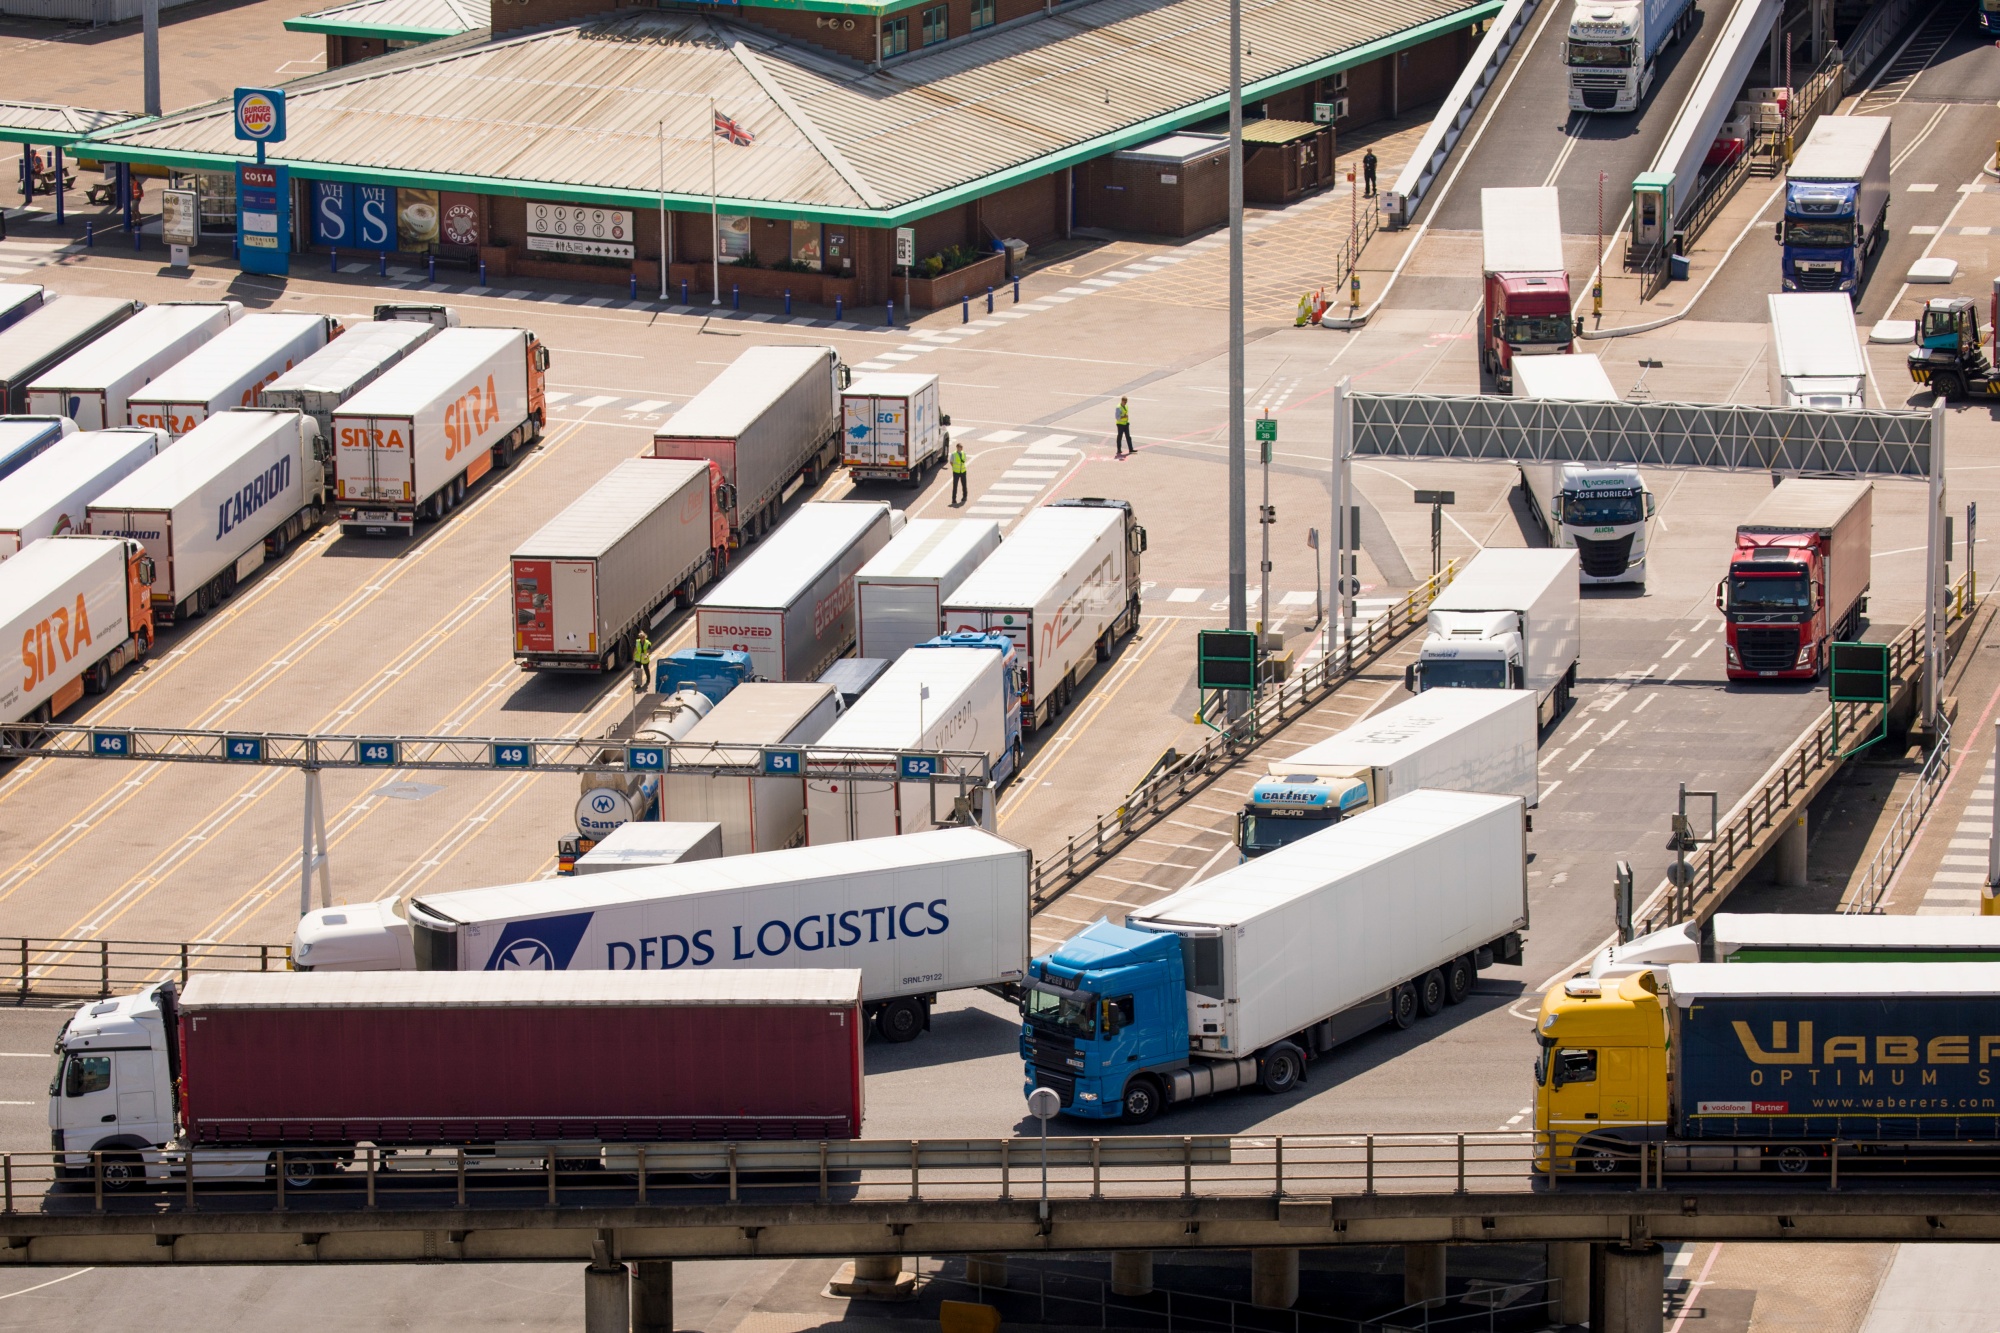 Lorries arrive from a ferry at the Port of Dover Ltd. in Dover, U.K.